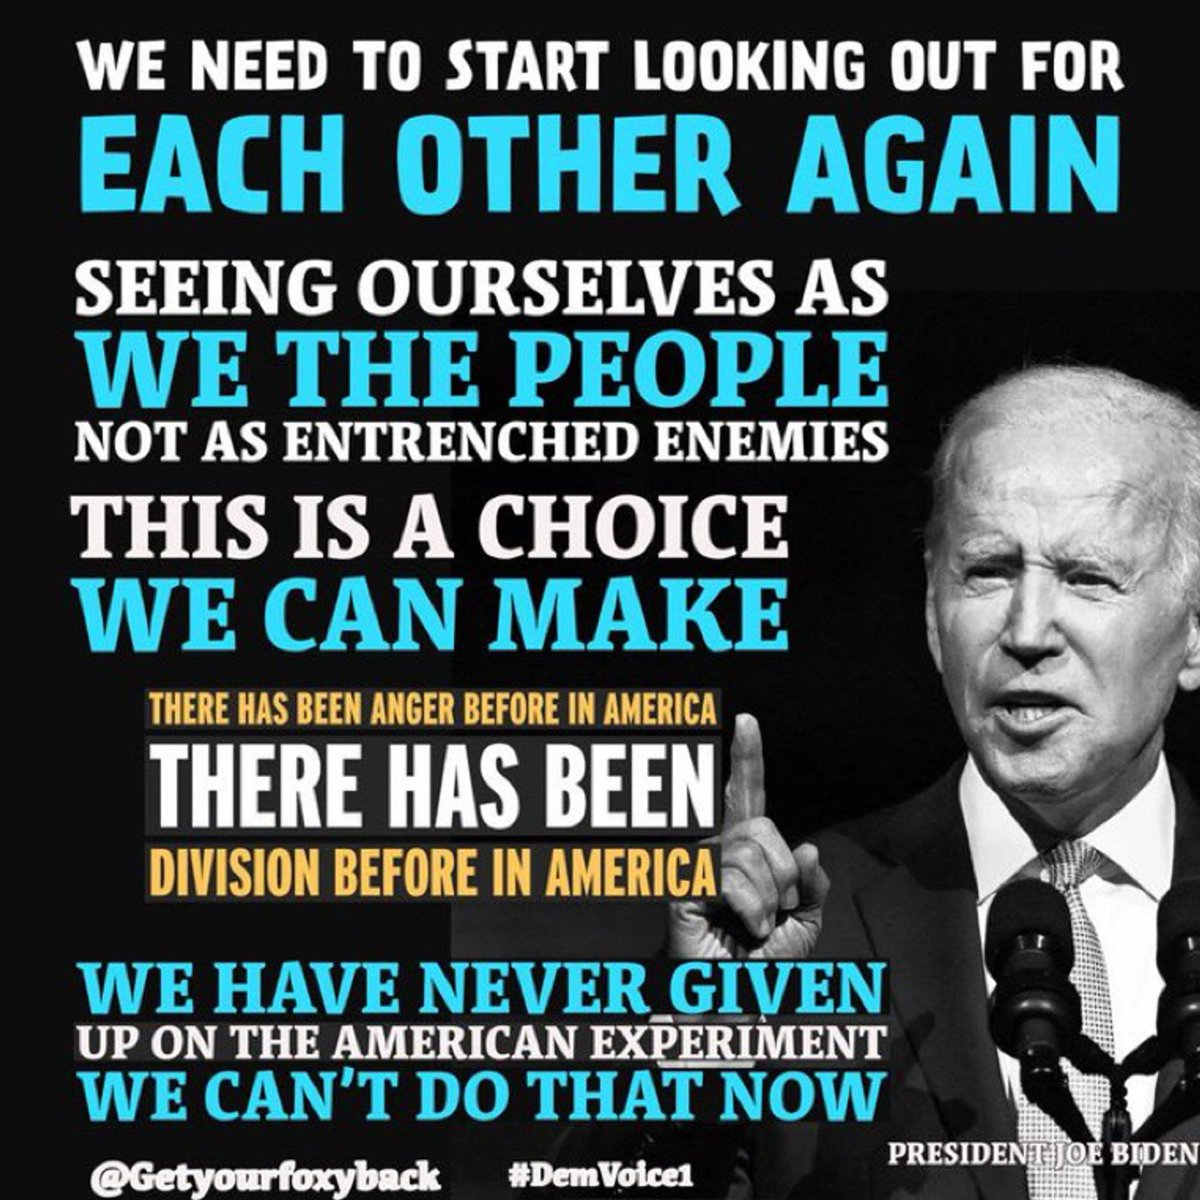 Do we want to go back to garbled, insulting speeches at rallies, and more tax cuts for the obscenely wealthy? Or do we want four more years of competence and decency, with someone who speaks like this? Really not a hard choice. Vote Biden. #USDemocracy #DemVoice1 #BidenBoom